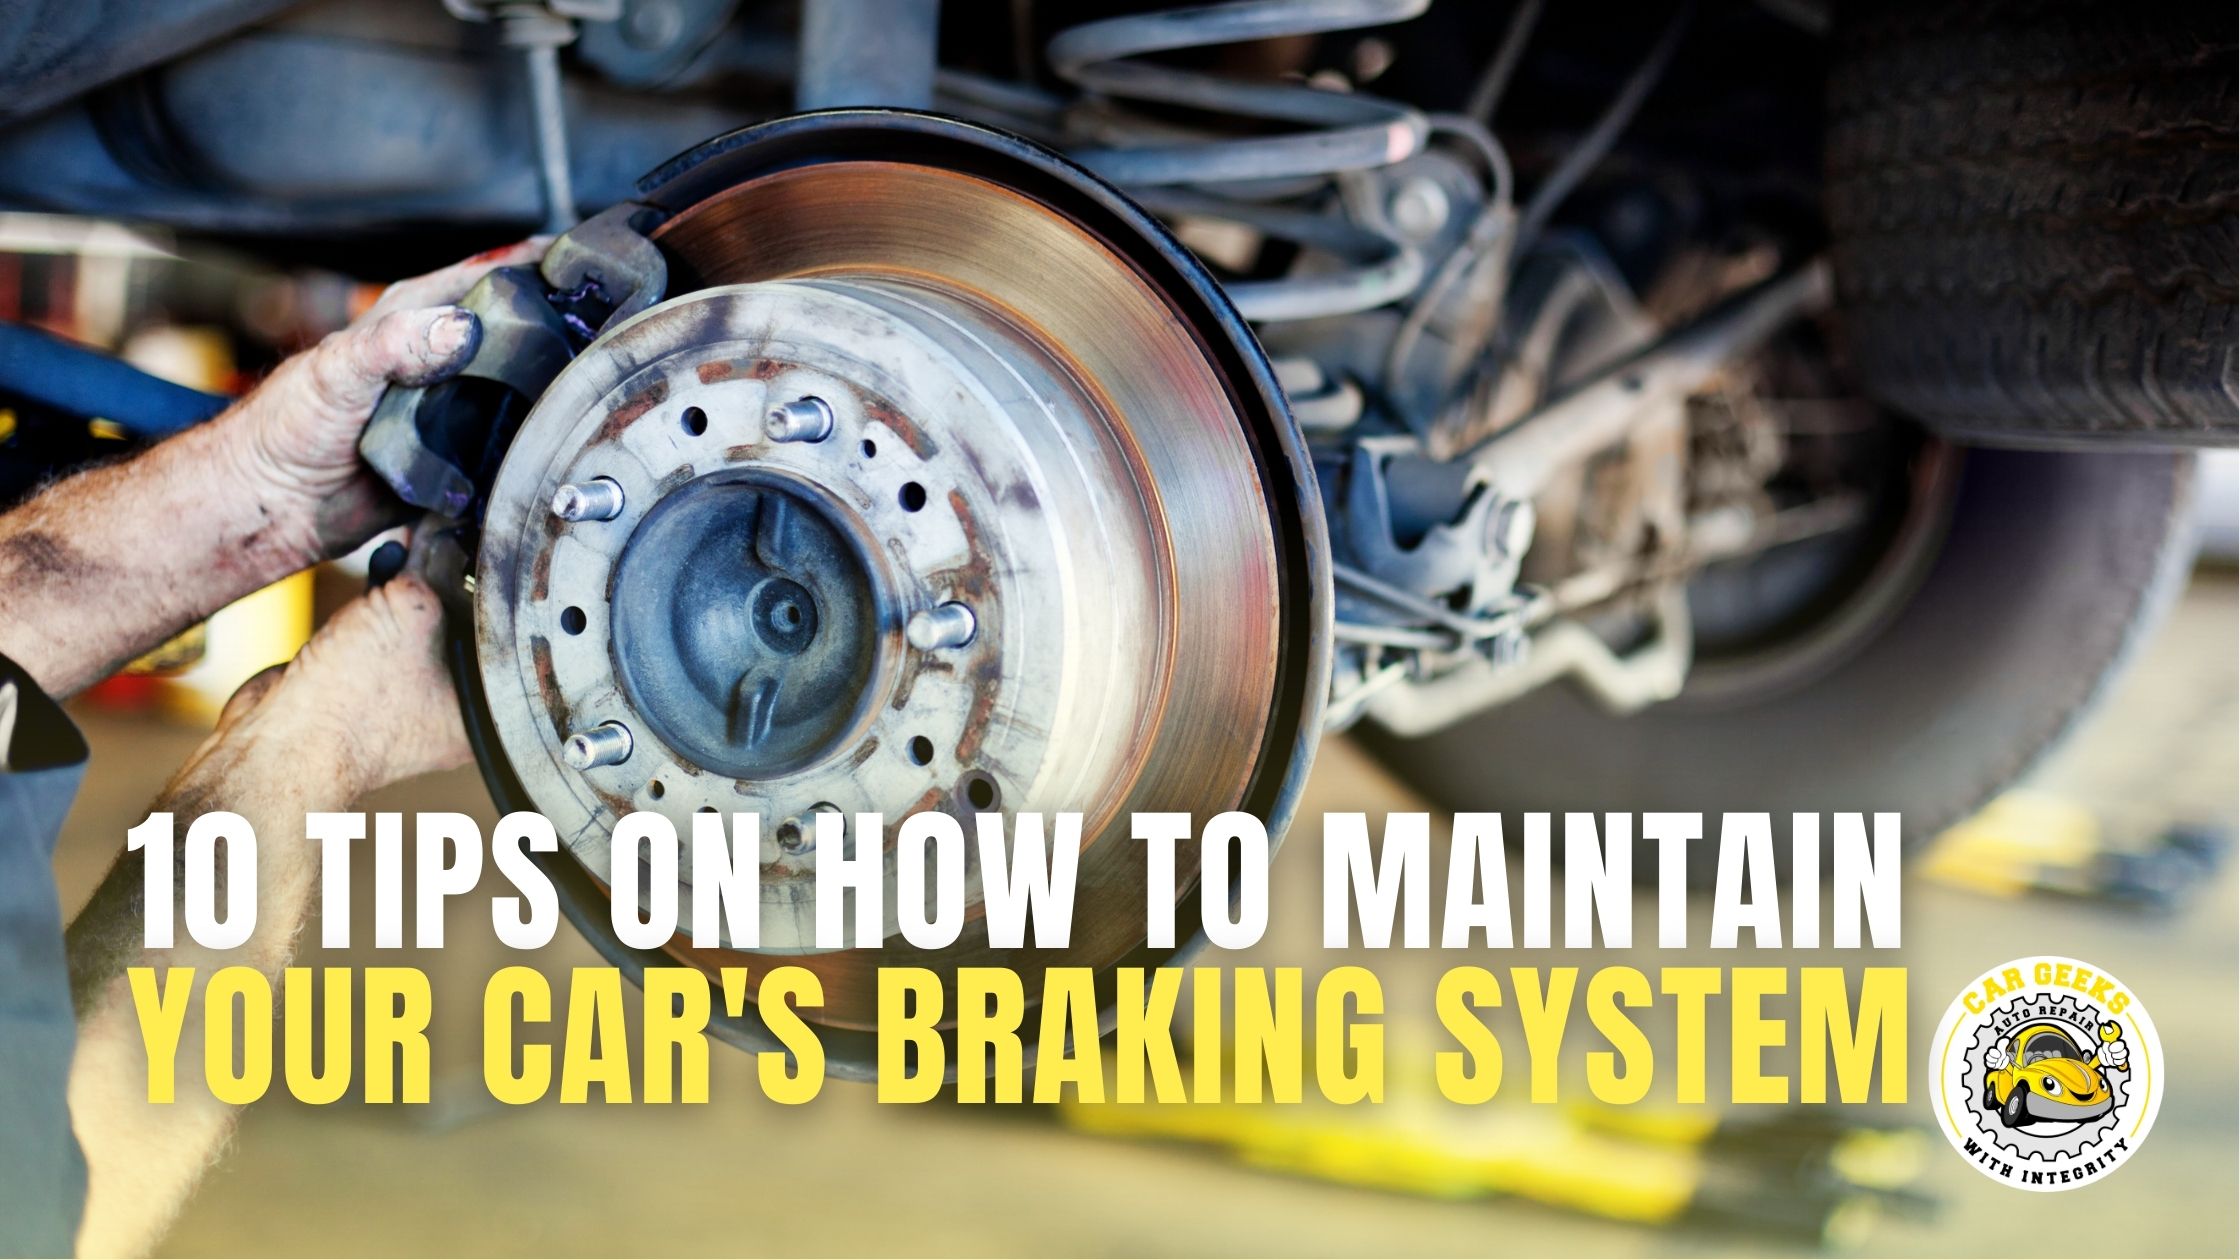 10 Tips on How to Maintain Your Car's Braking System